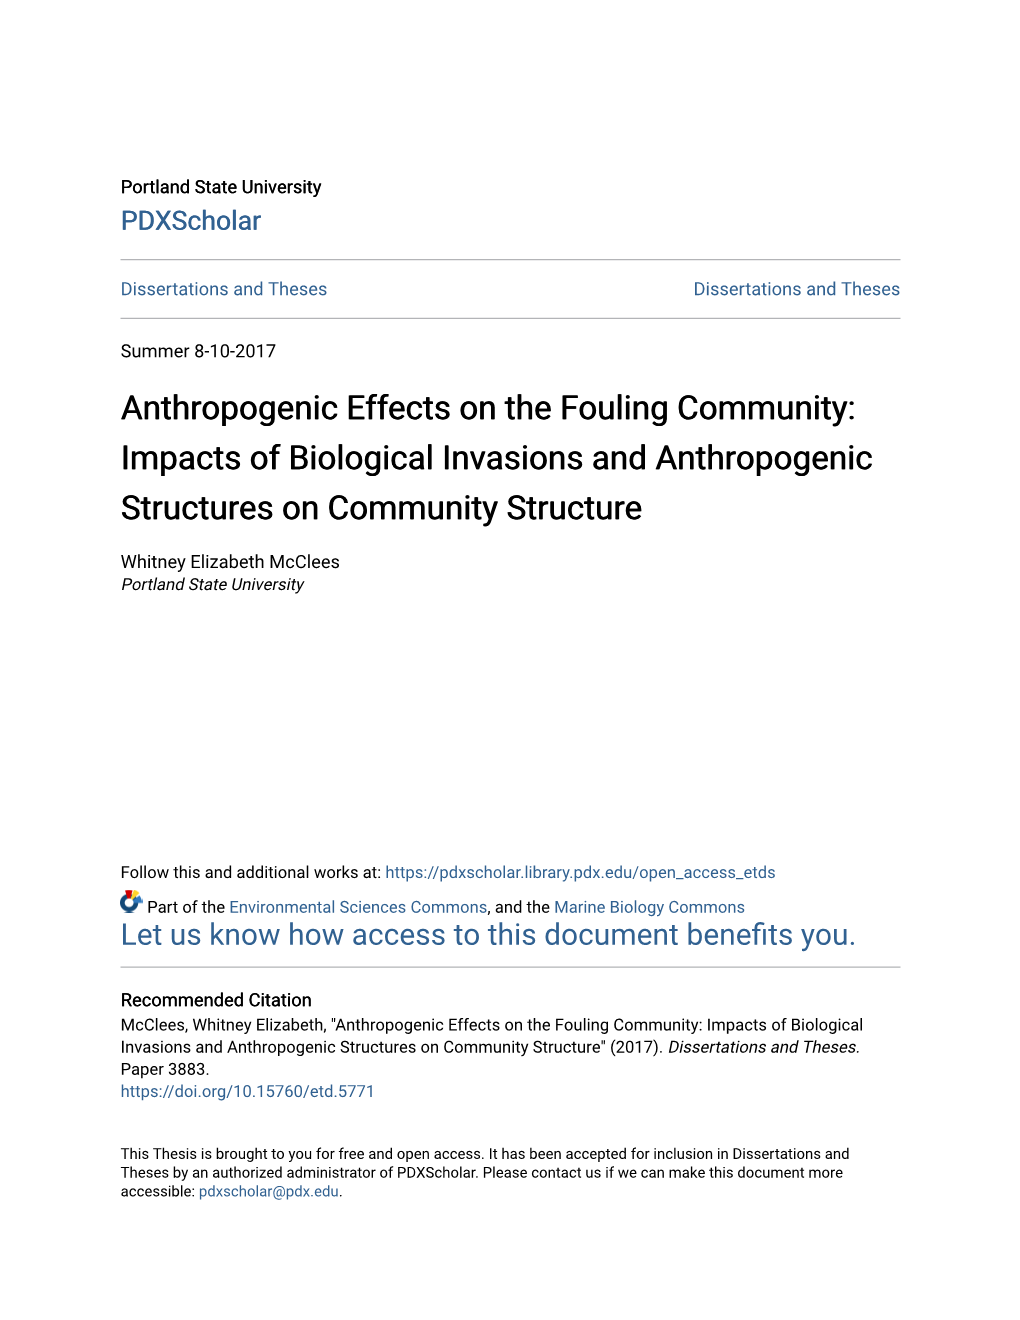 Anthropogenic Effects on the Fouling Community: Impacts of Biological Invasions and Anthropogenic Structures on Community Structure